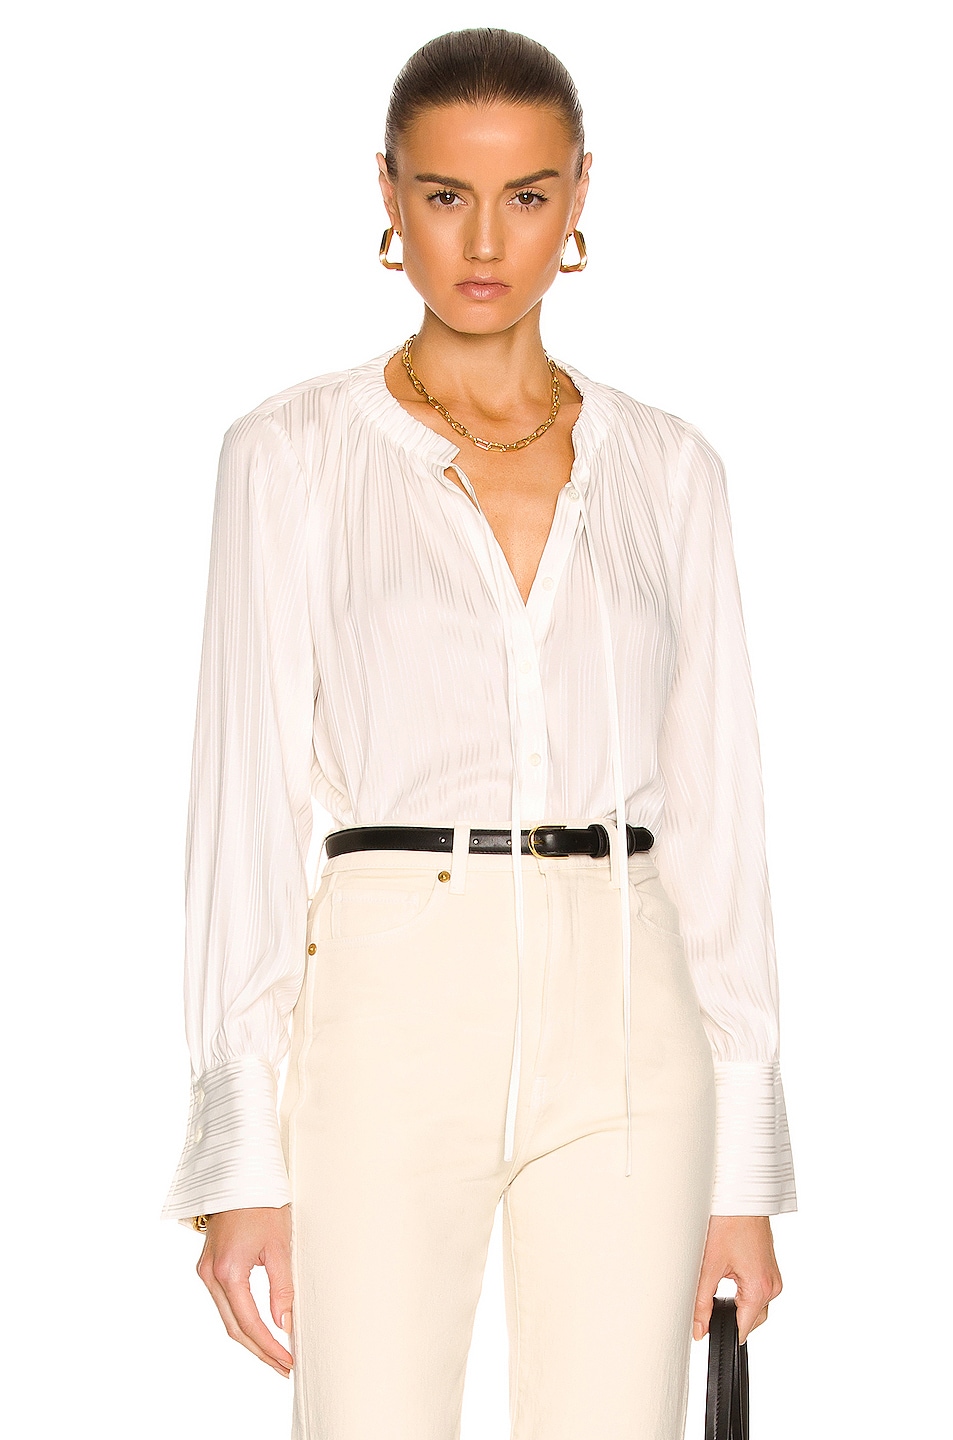 FRAME Shirred Neck Tie Blouse in Off White | FWRD